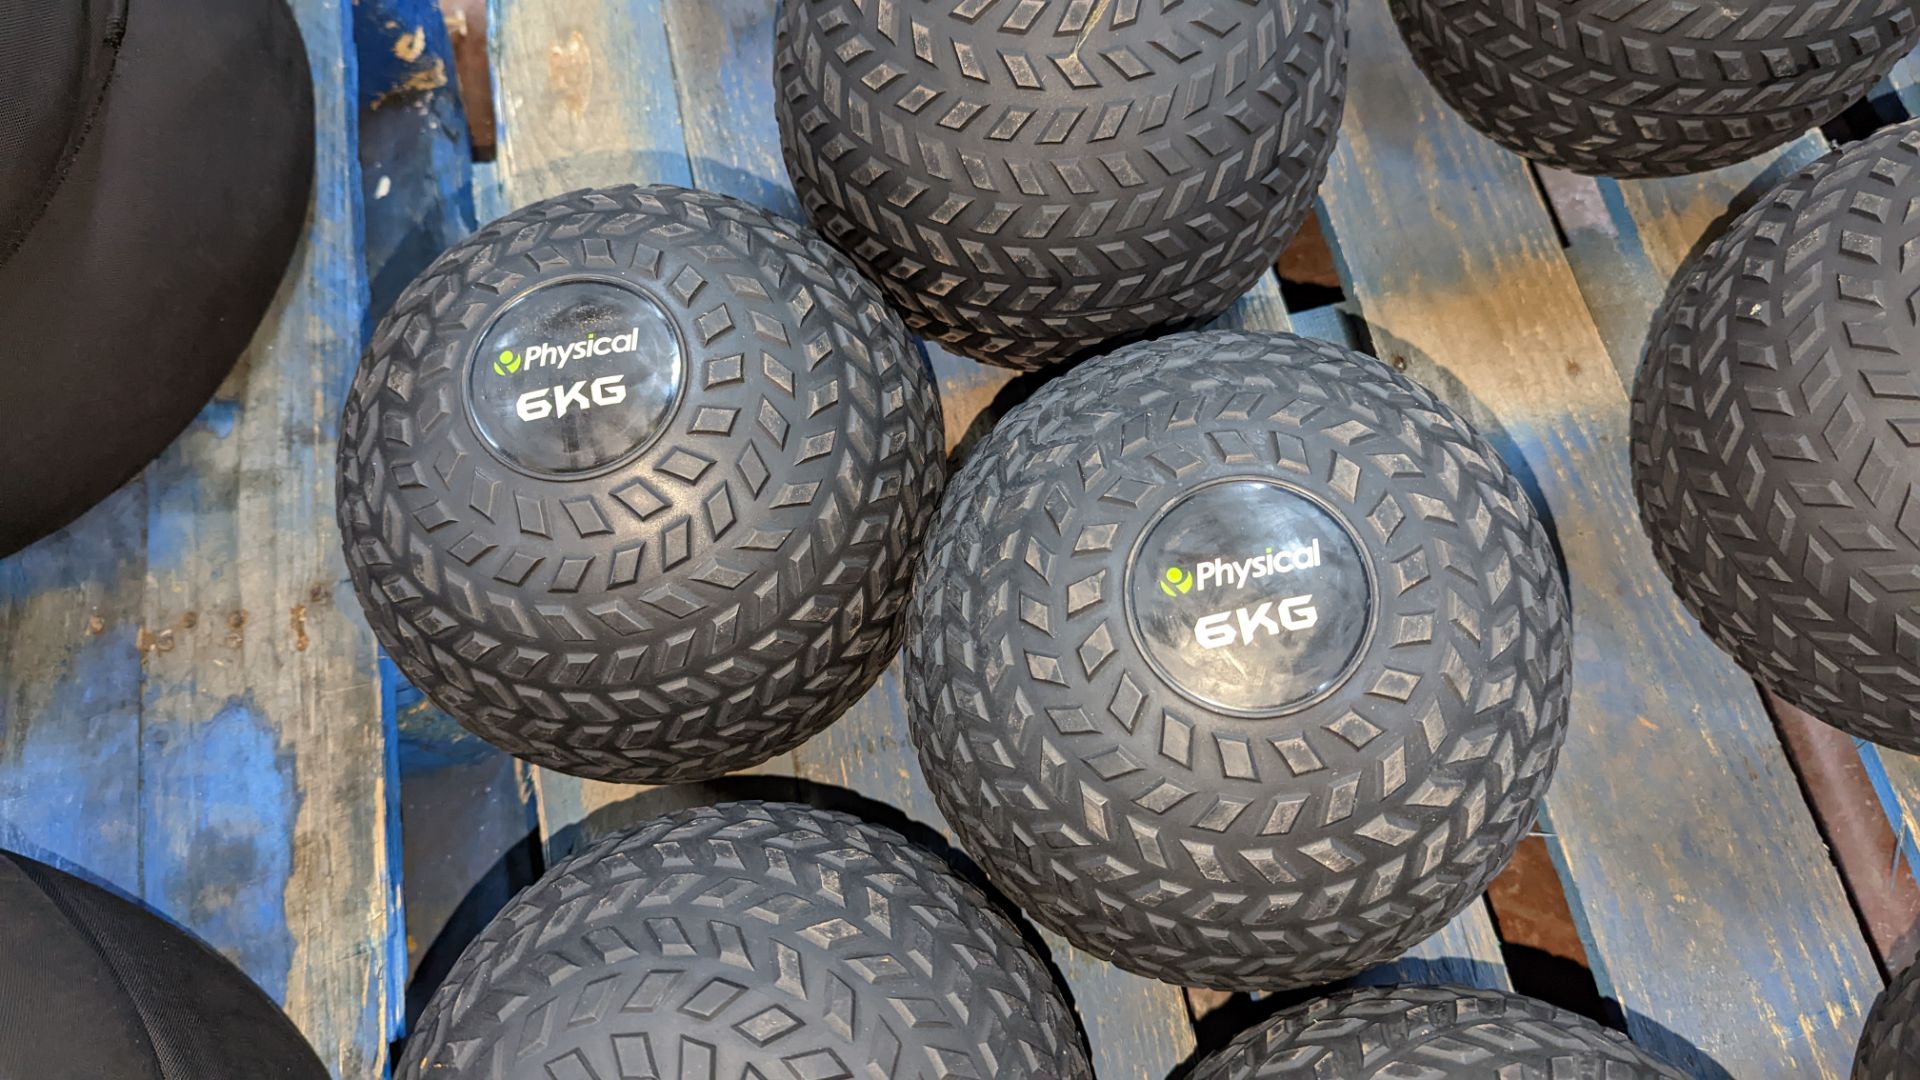 6 off weighted rubber balls, each weighing 6kg - Image 4 of 5